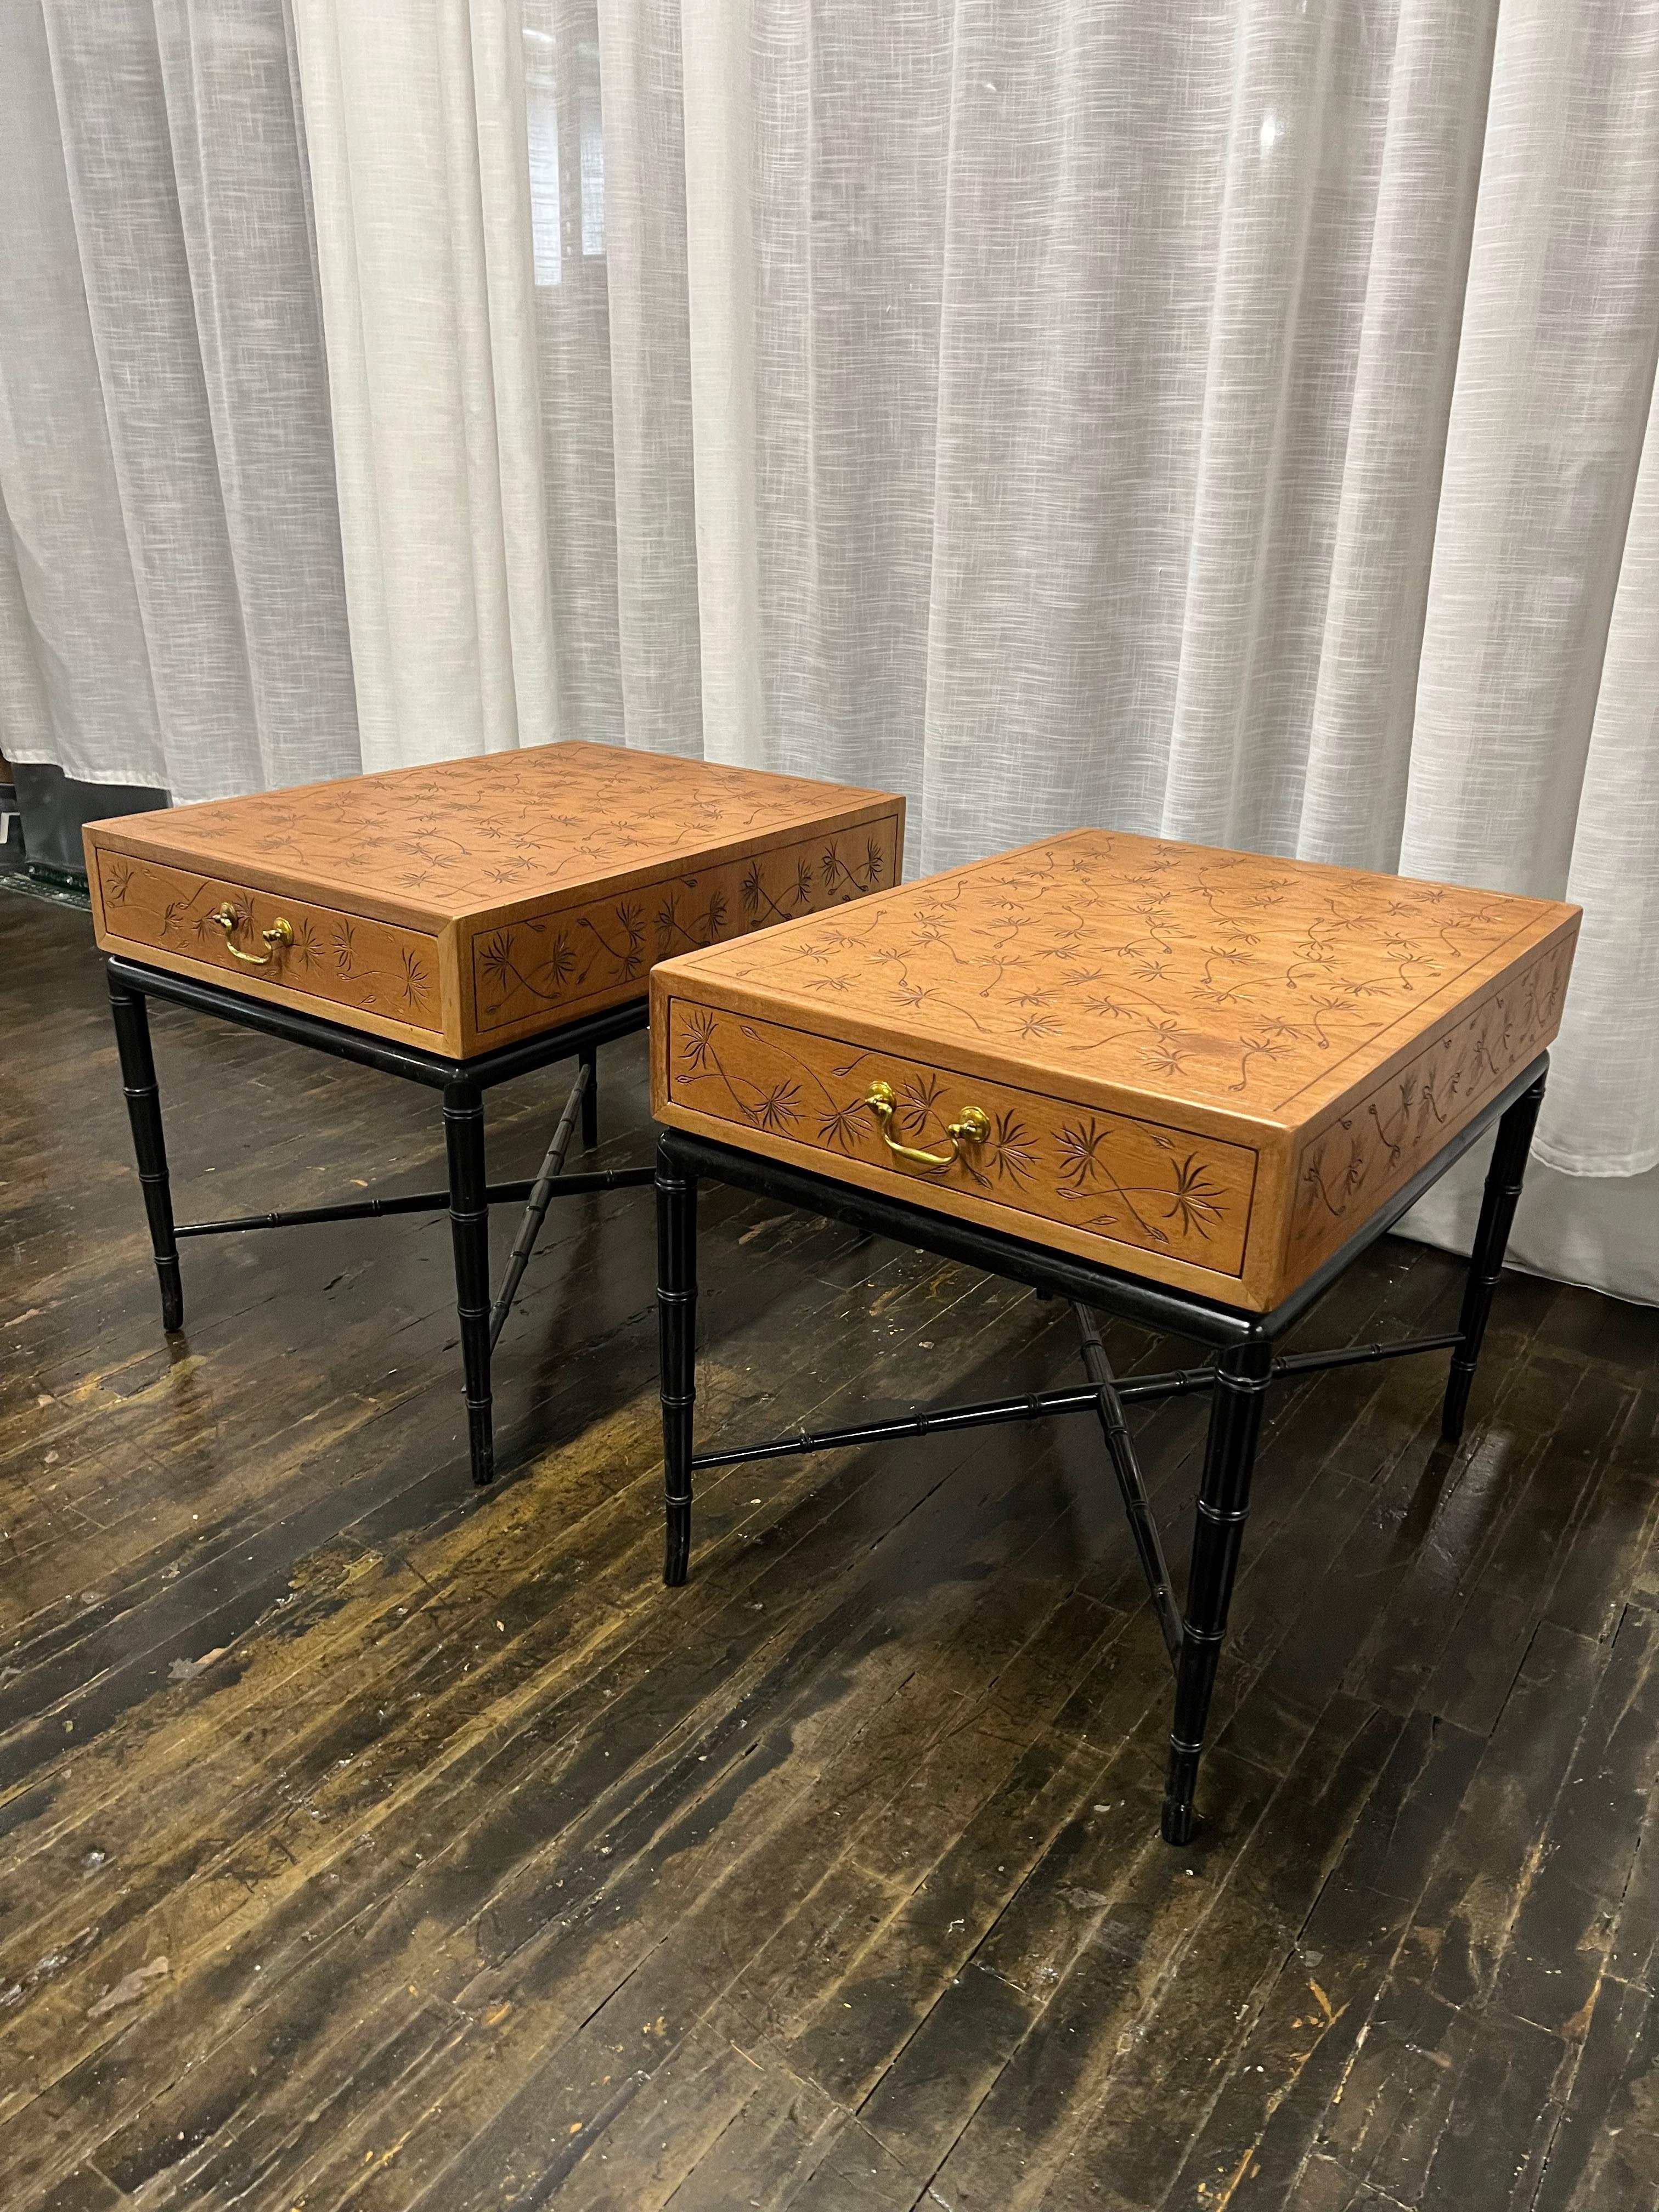 Lovely pair of Hollywood Regency style end / side tables with a walnut case that has an incised dandelion pattern (in black) and a single drawer with a brass drawer pull. The case rests on a black lacquered faux bamboo base with four tapered legs